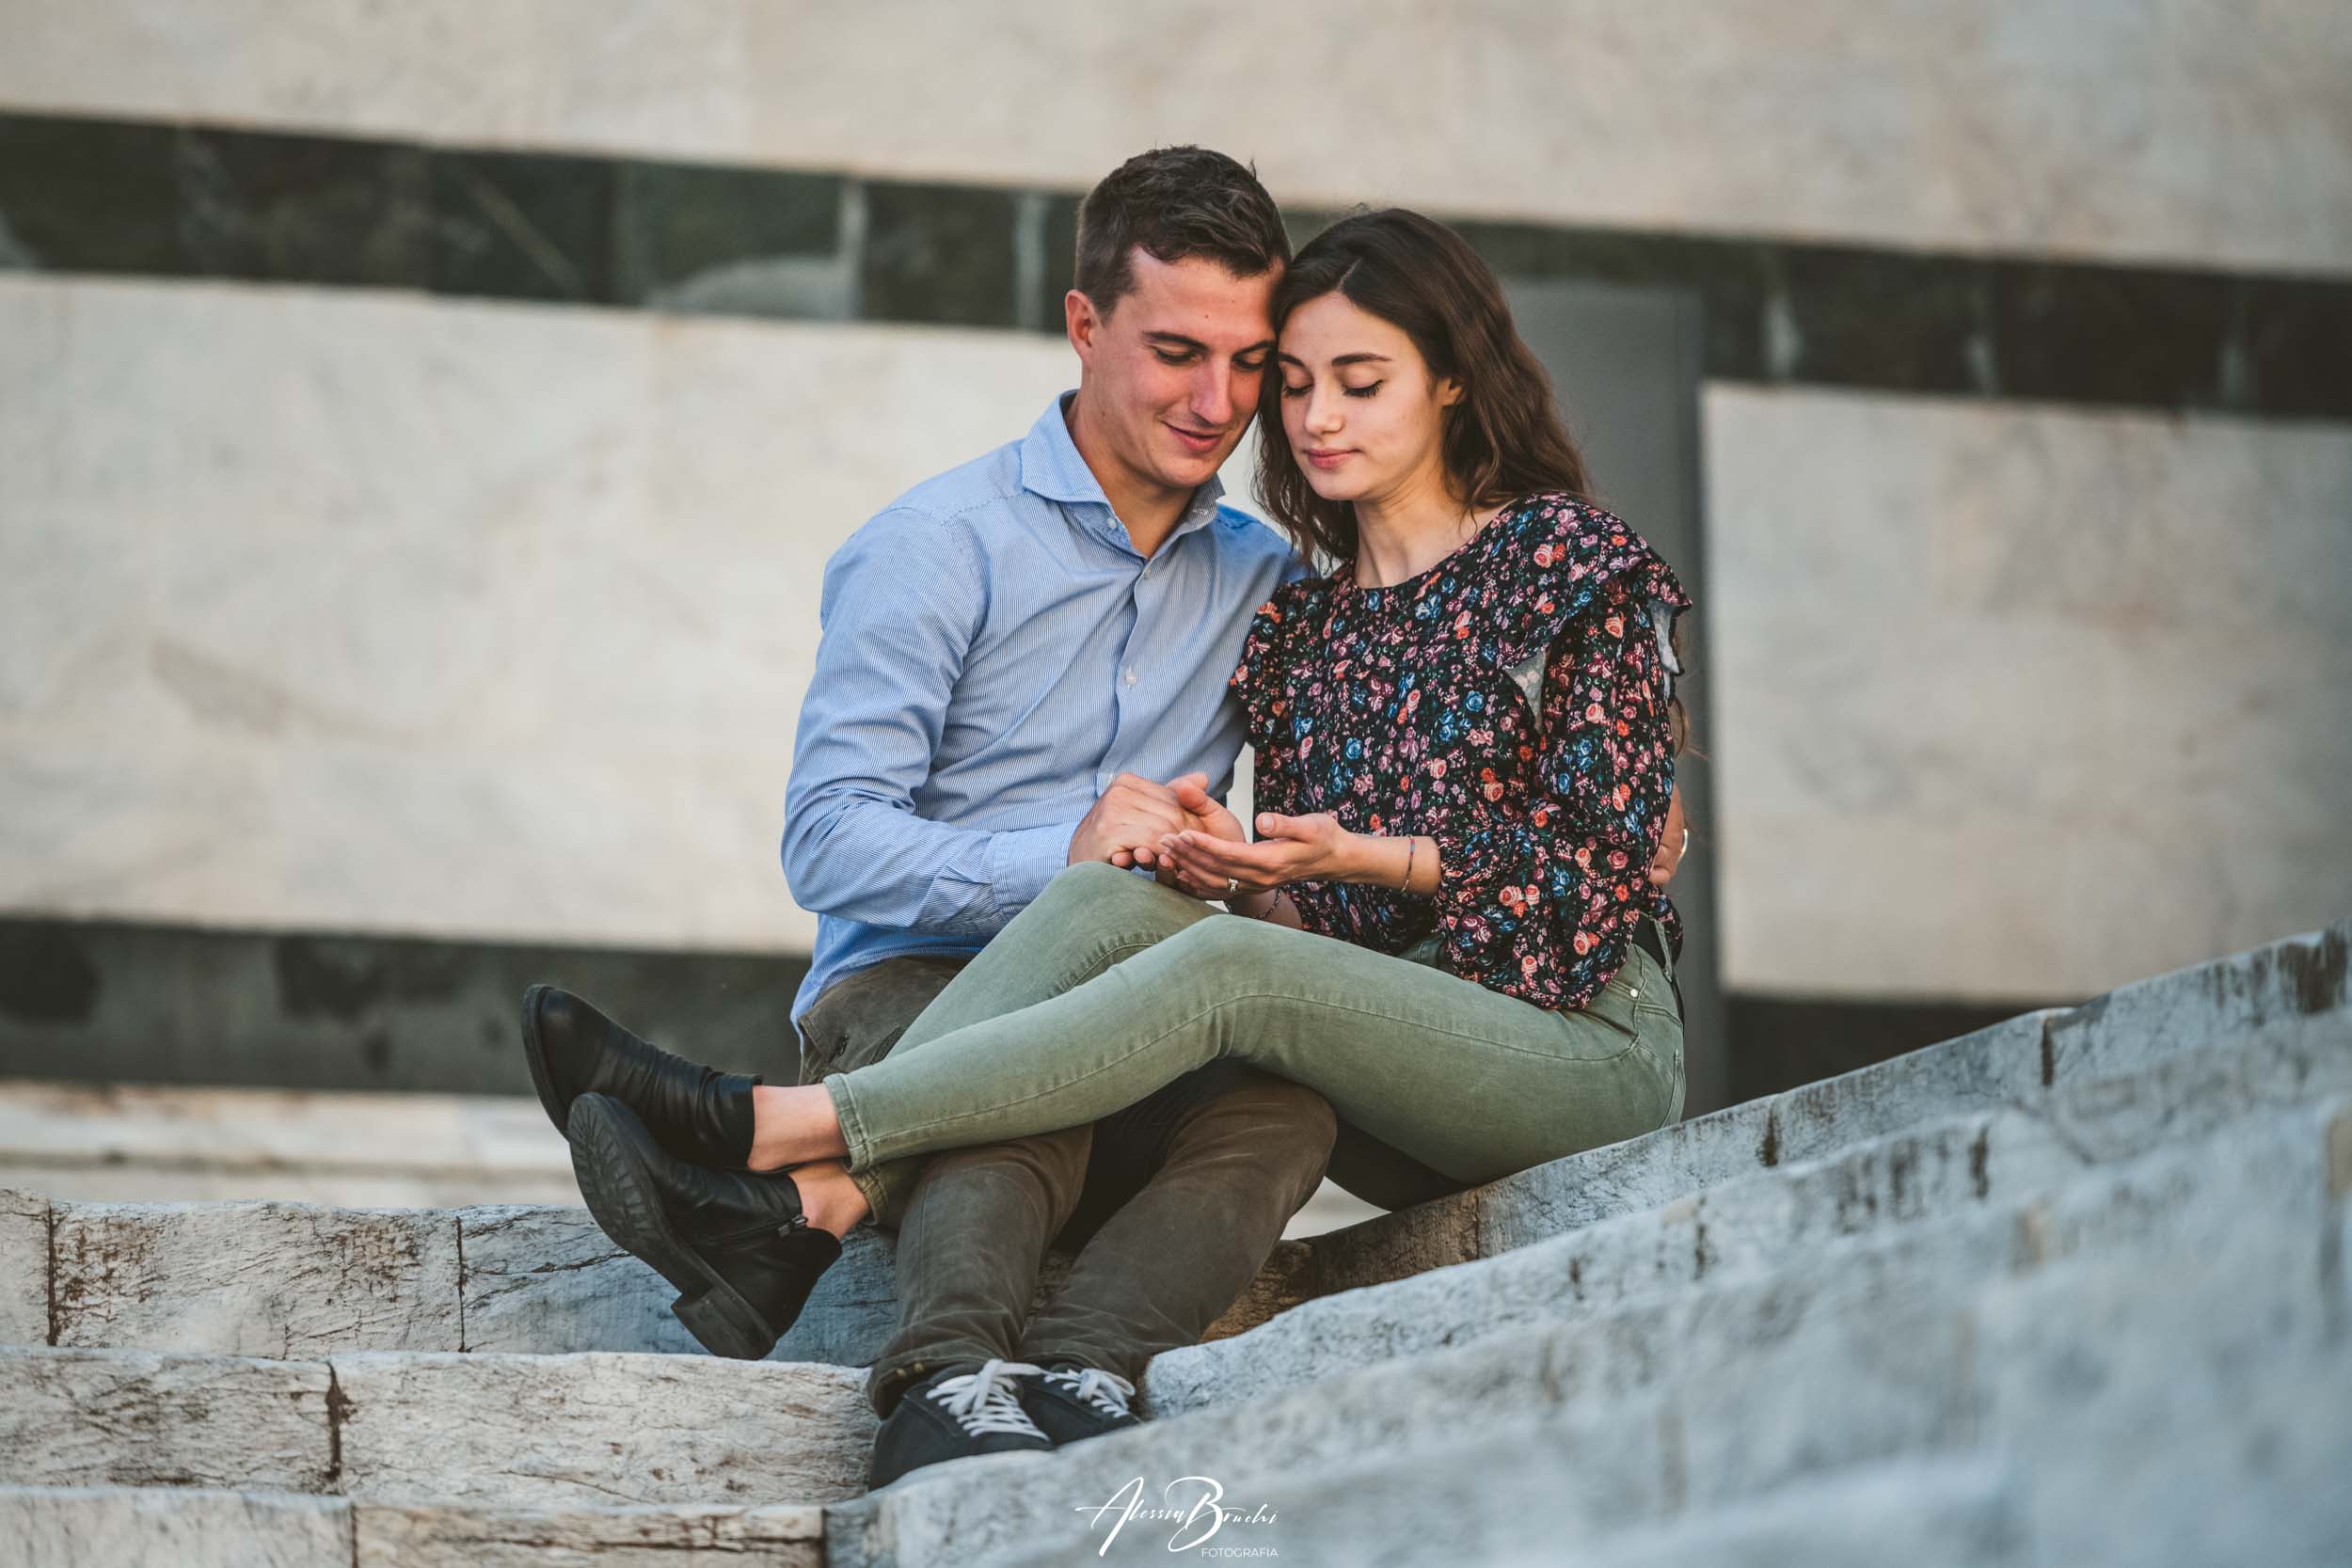 Engagement photos in Siena, Tuscany.